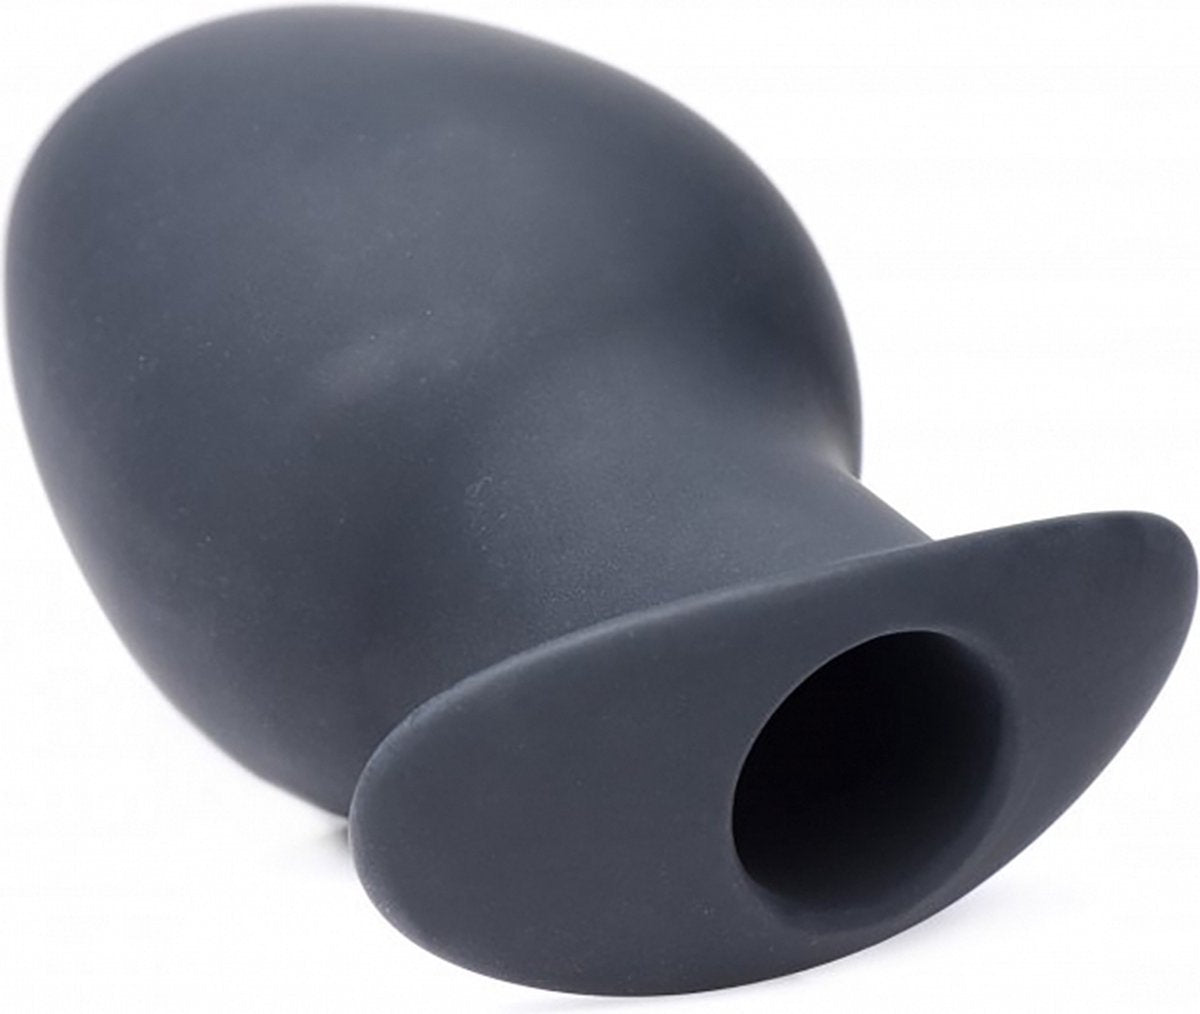 Hollow silicone anal plug LARGE